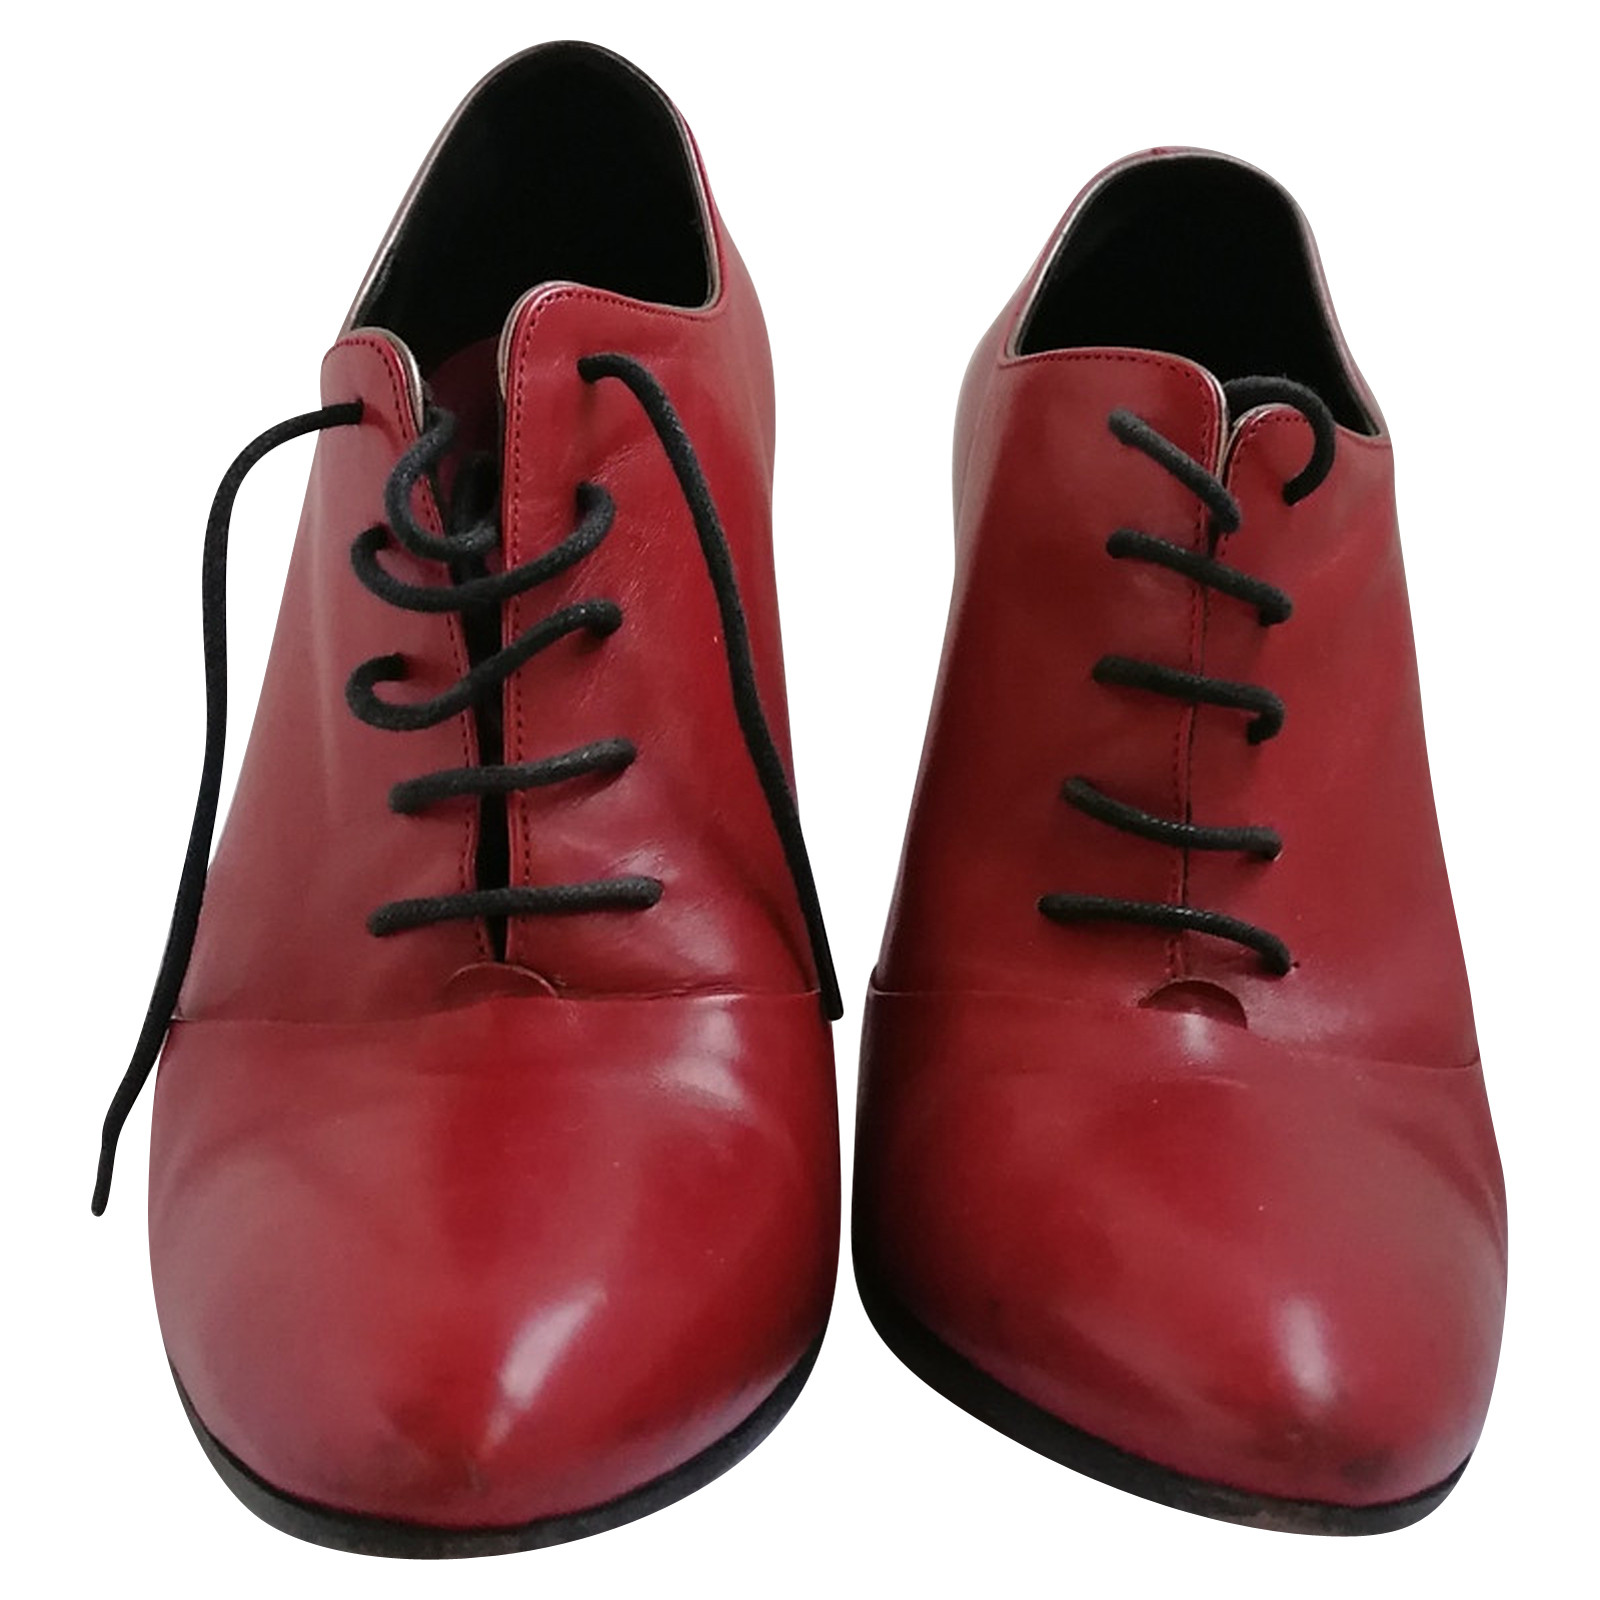 Hugo Boss Ankle boots Leather in Red - Second Hand Hugo Boss Ankle boots  Leather in Red buy used for 72€ (4756273)